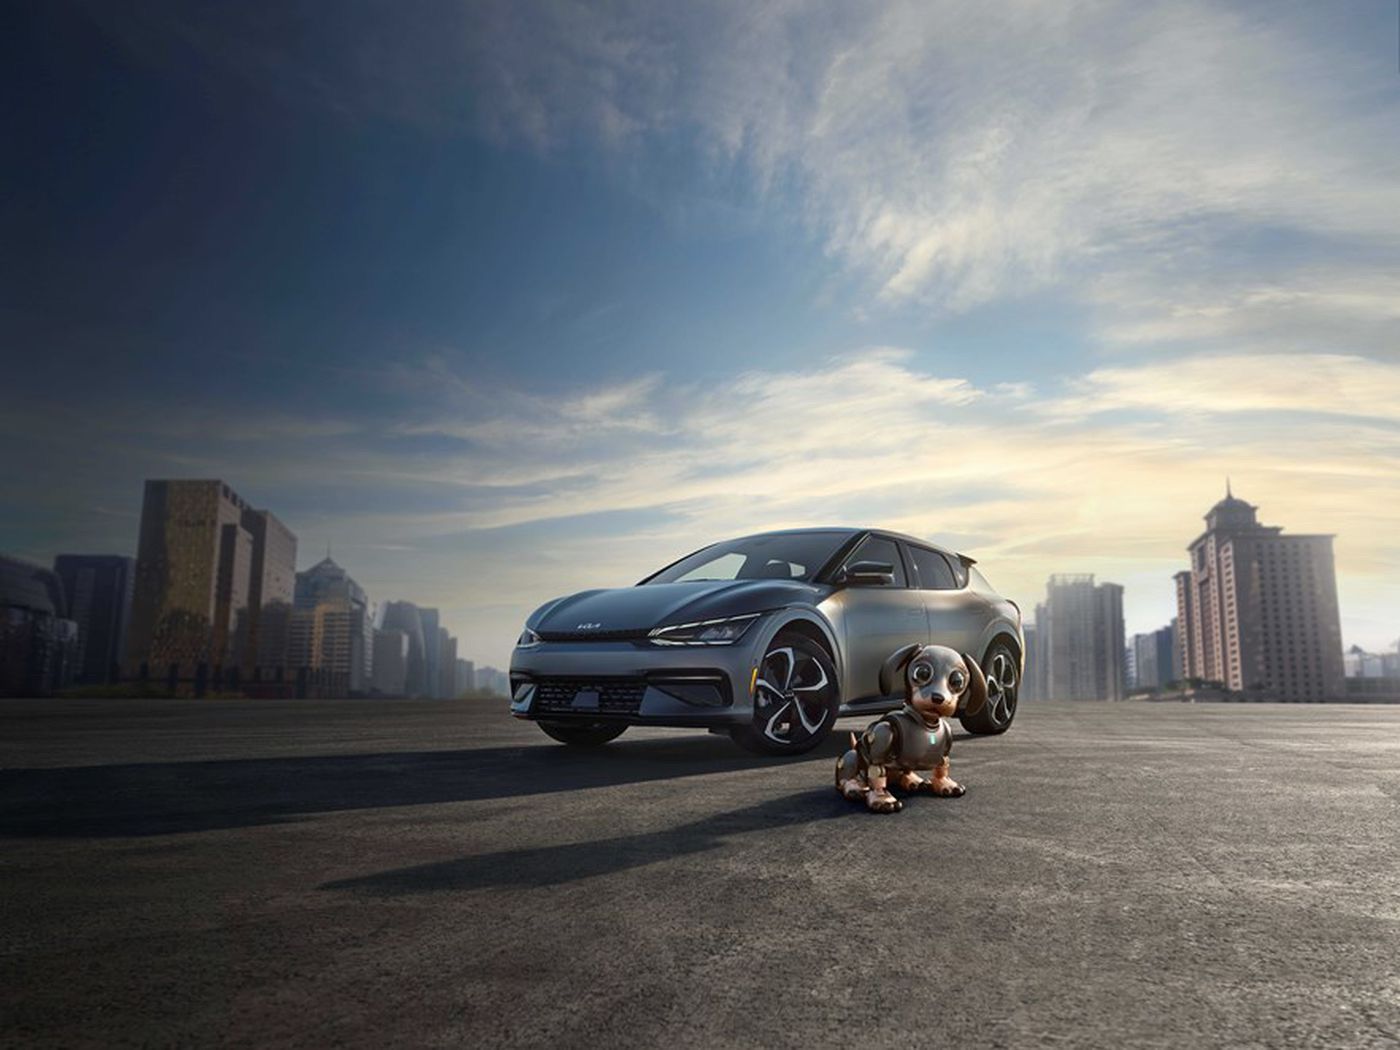 Animated robot dog in Kia ad for electric car